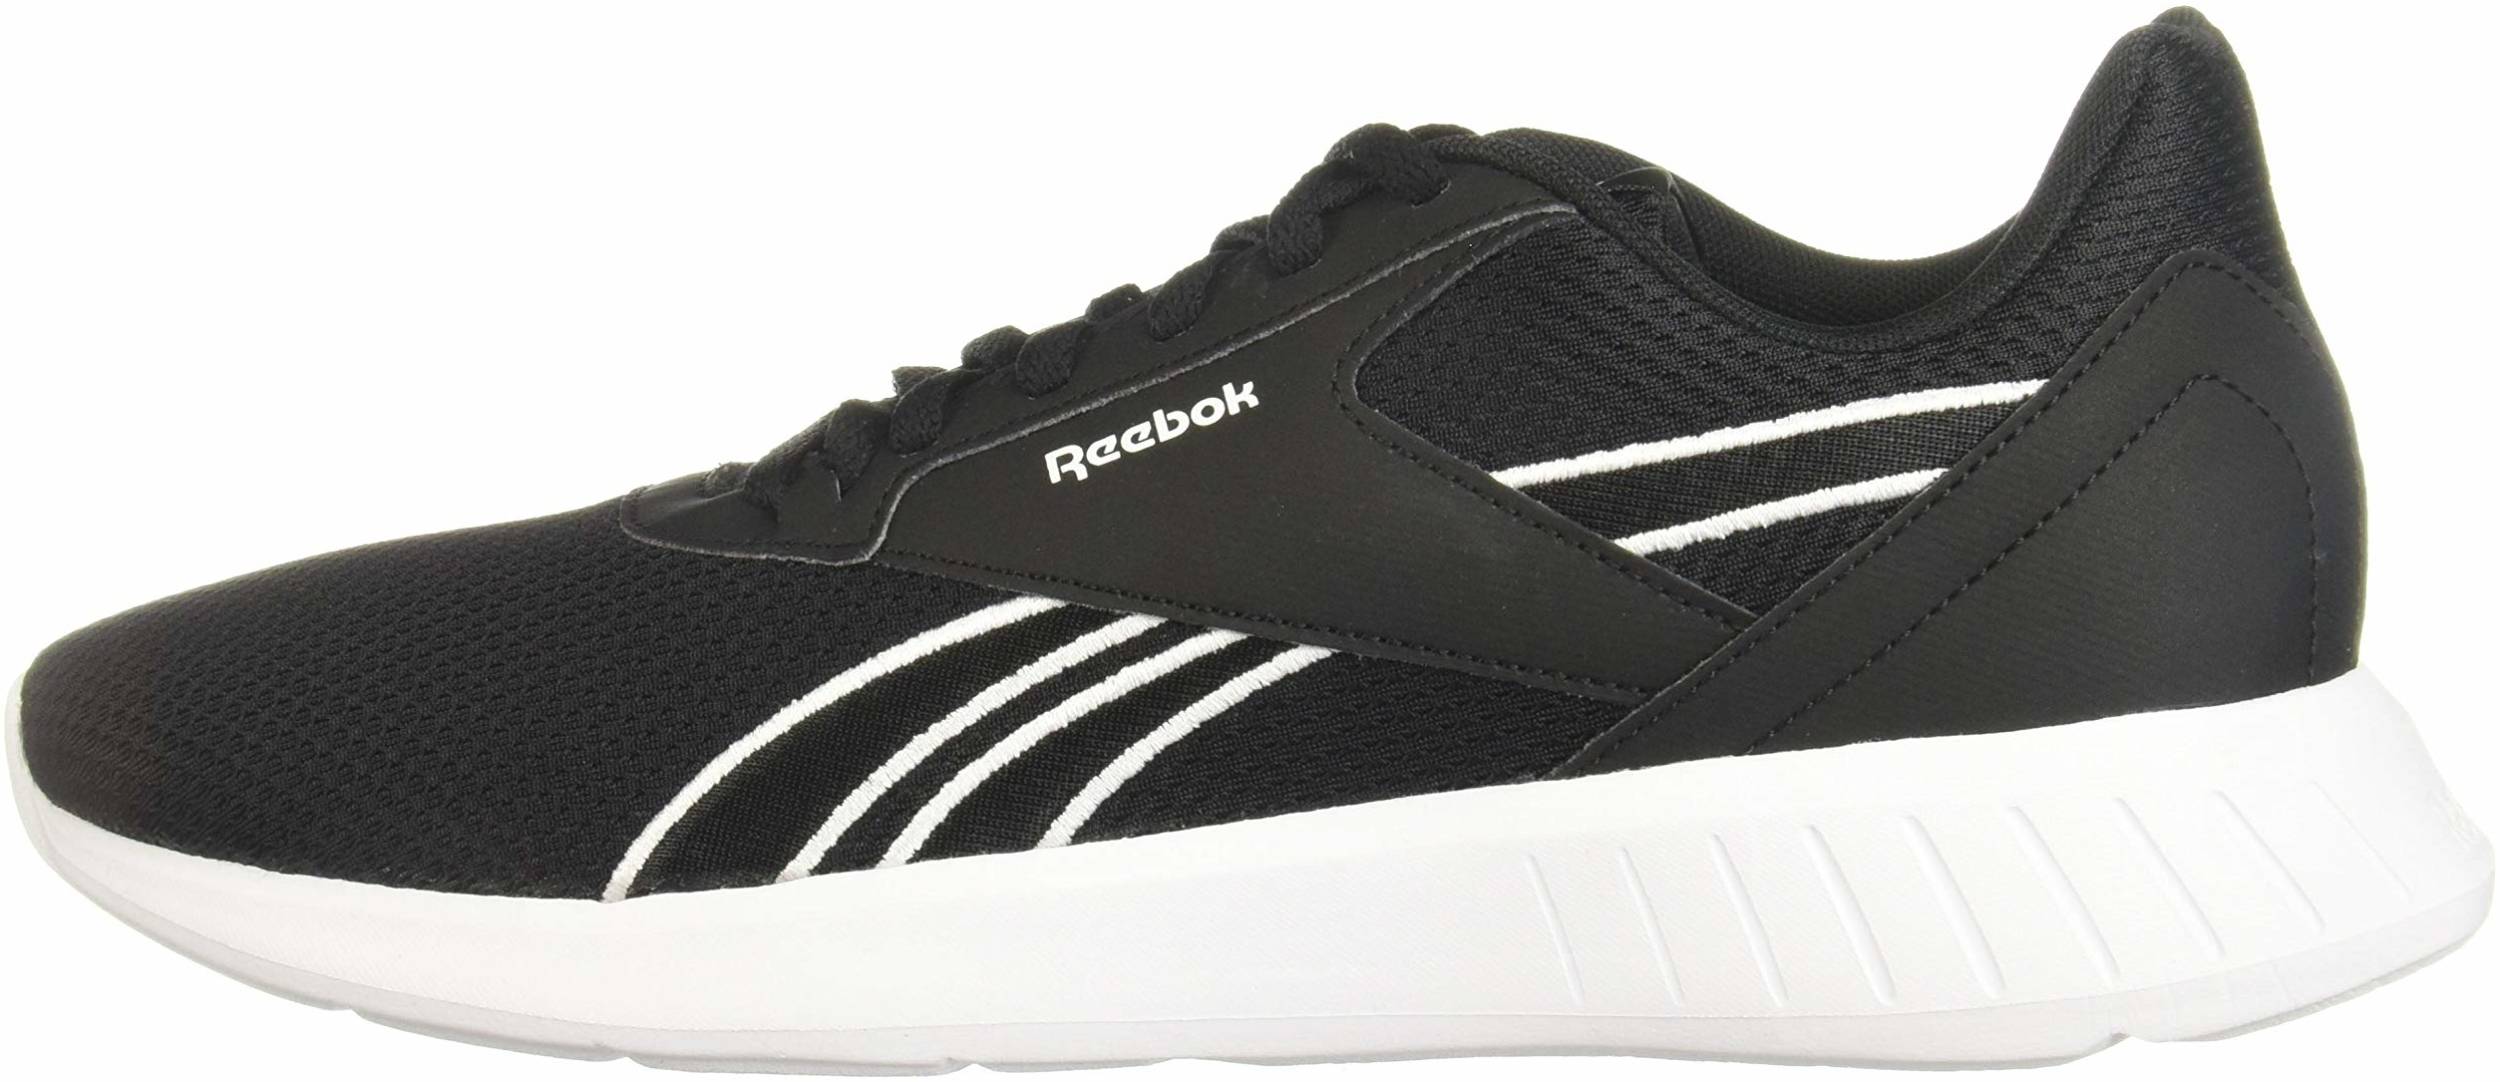 Only $38 + Review of Reebok Lite 2.0 